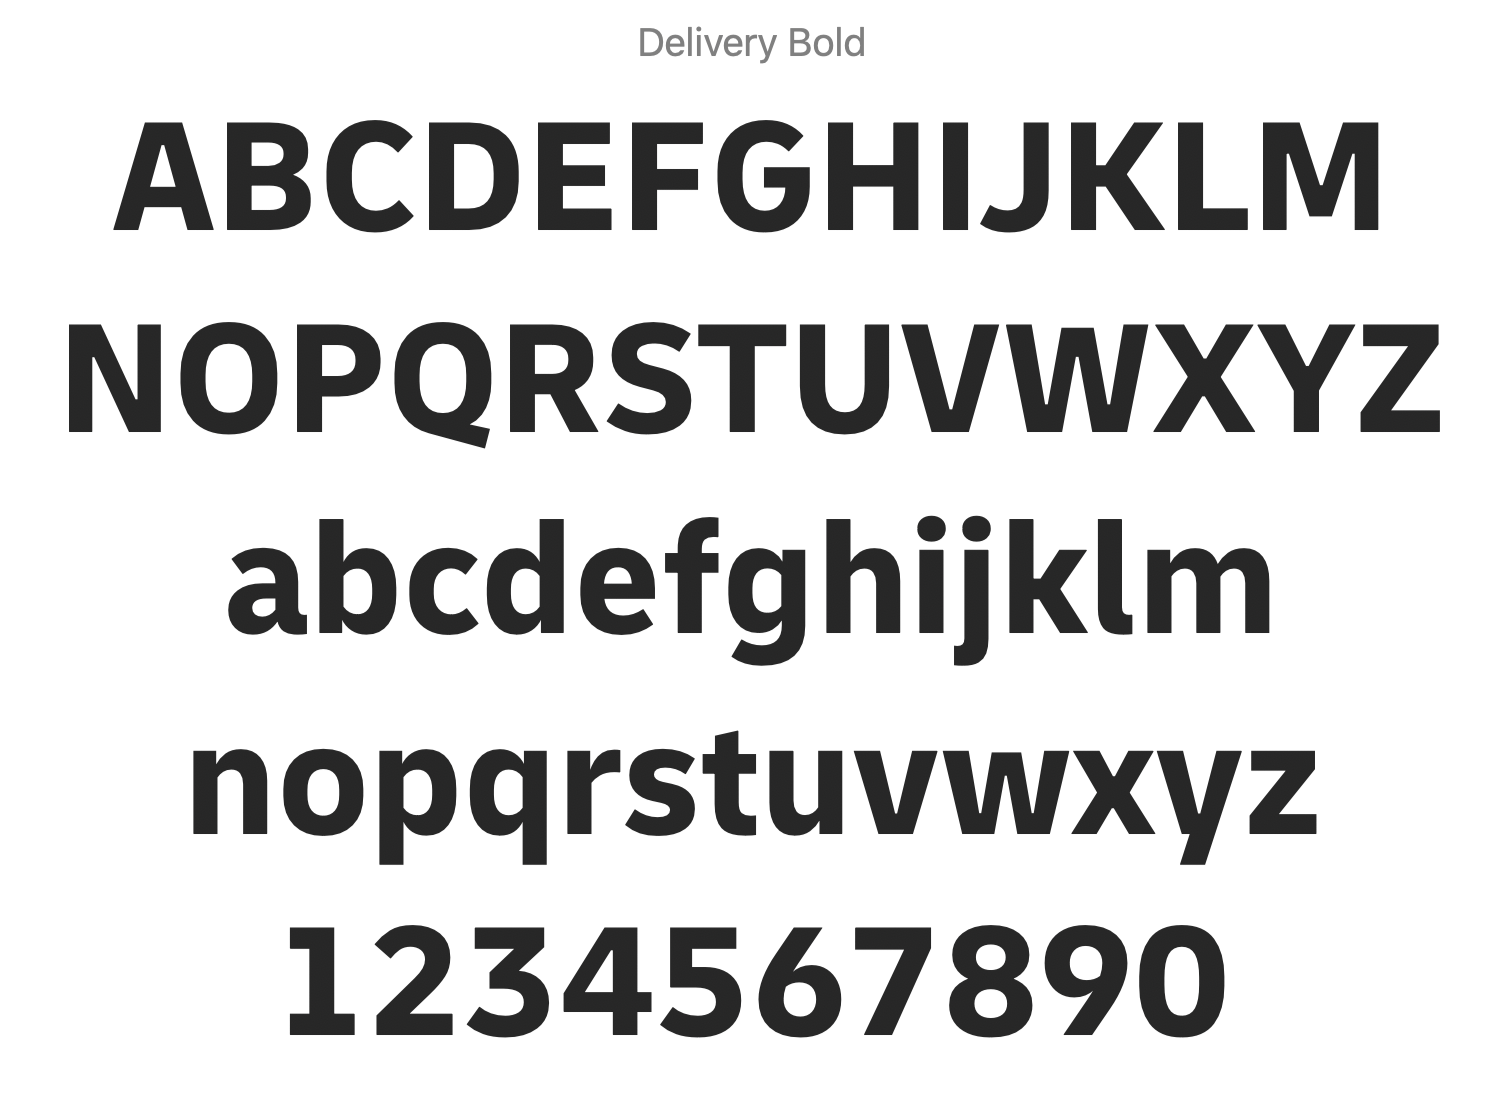 Here is the 'Delivery' typeface from DHL